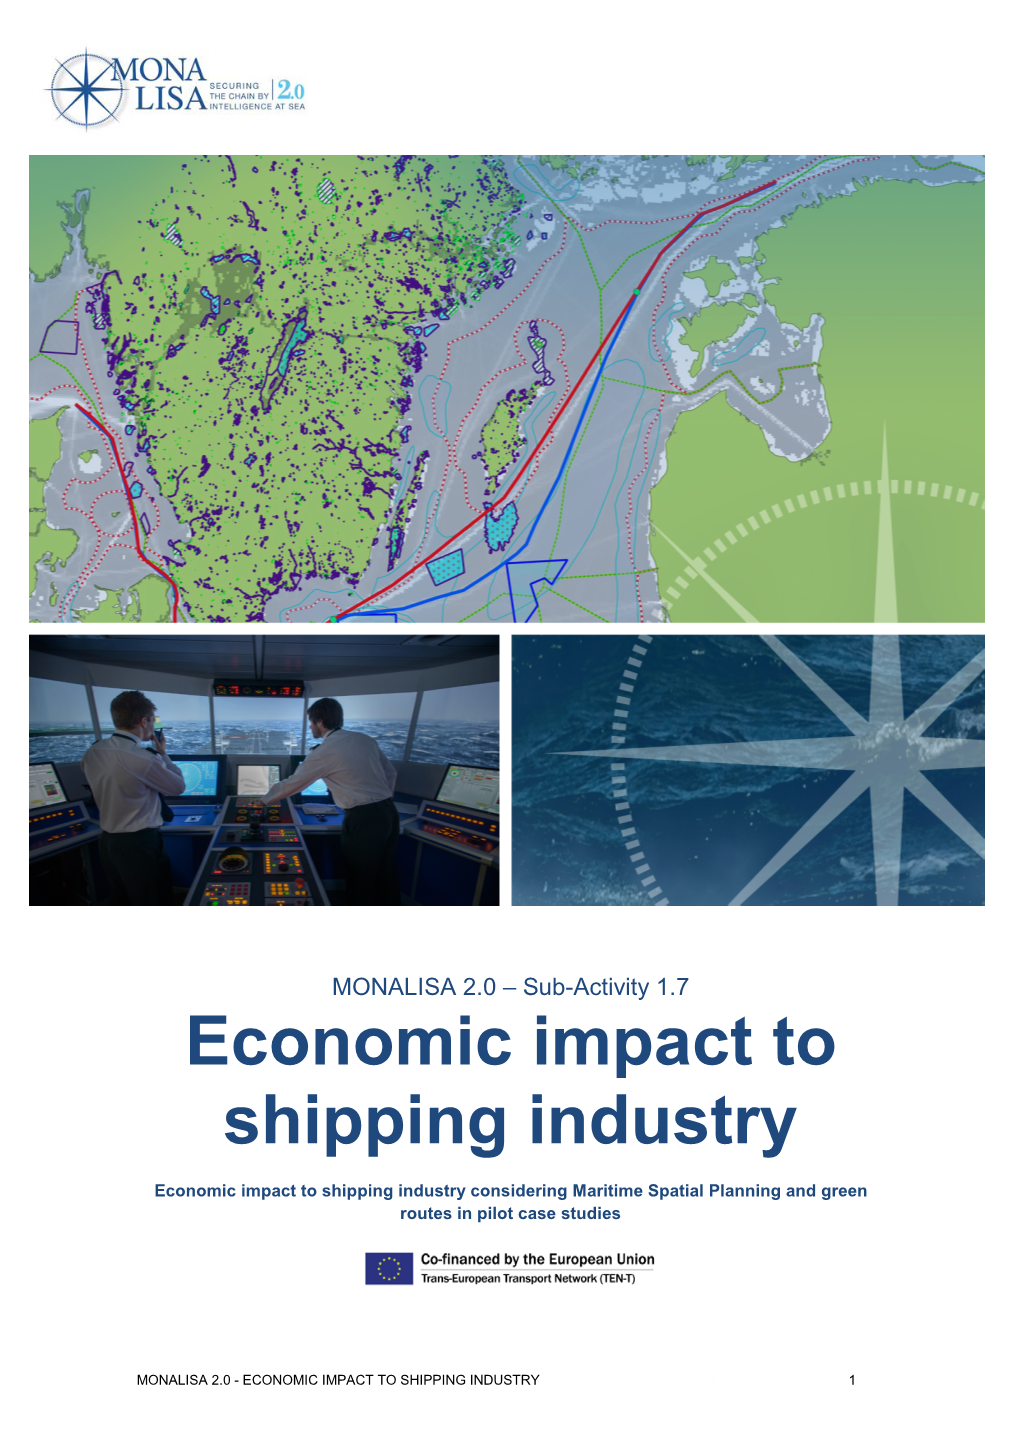 Economic Impact to Shipping Industry